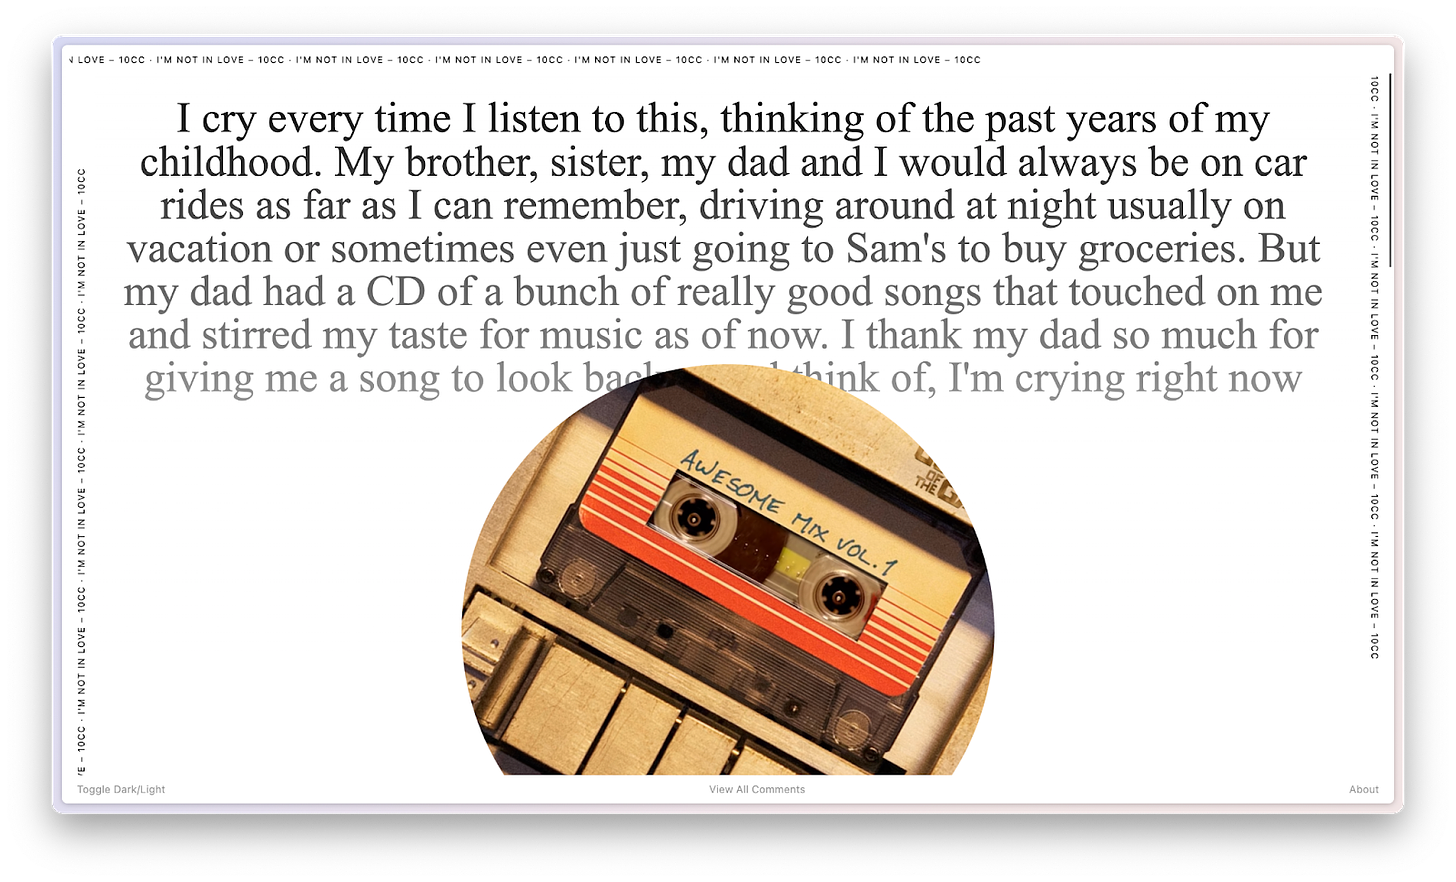 a screenshot of a website with a cassette tape cut into a record-like circle, and a youtube comment that begins "I cry every time I listen to this"